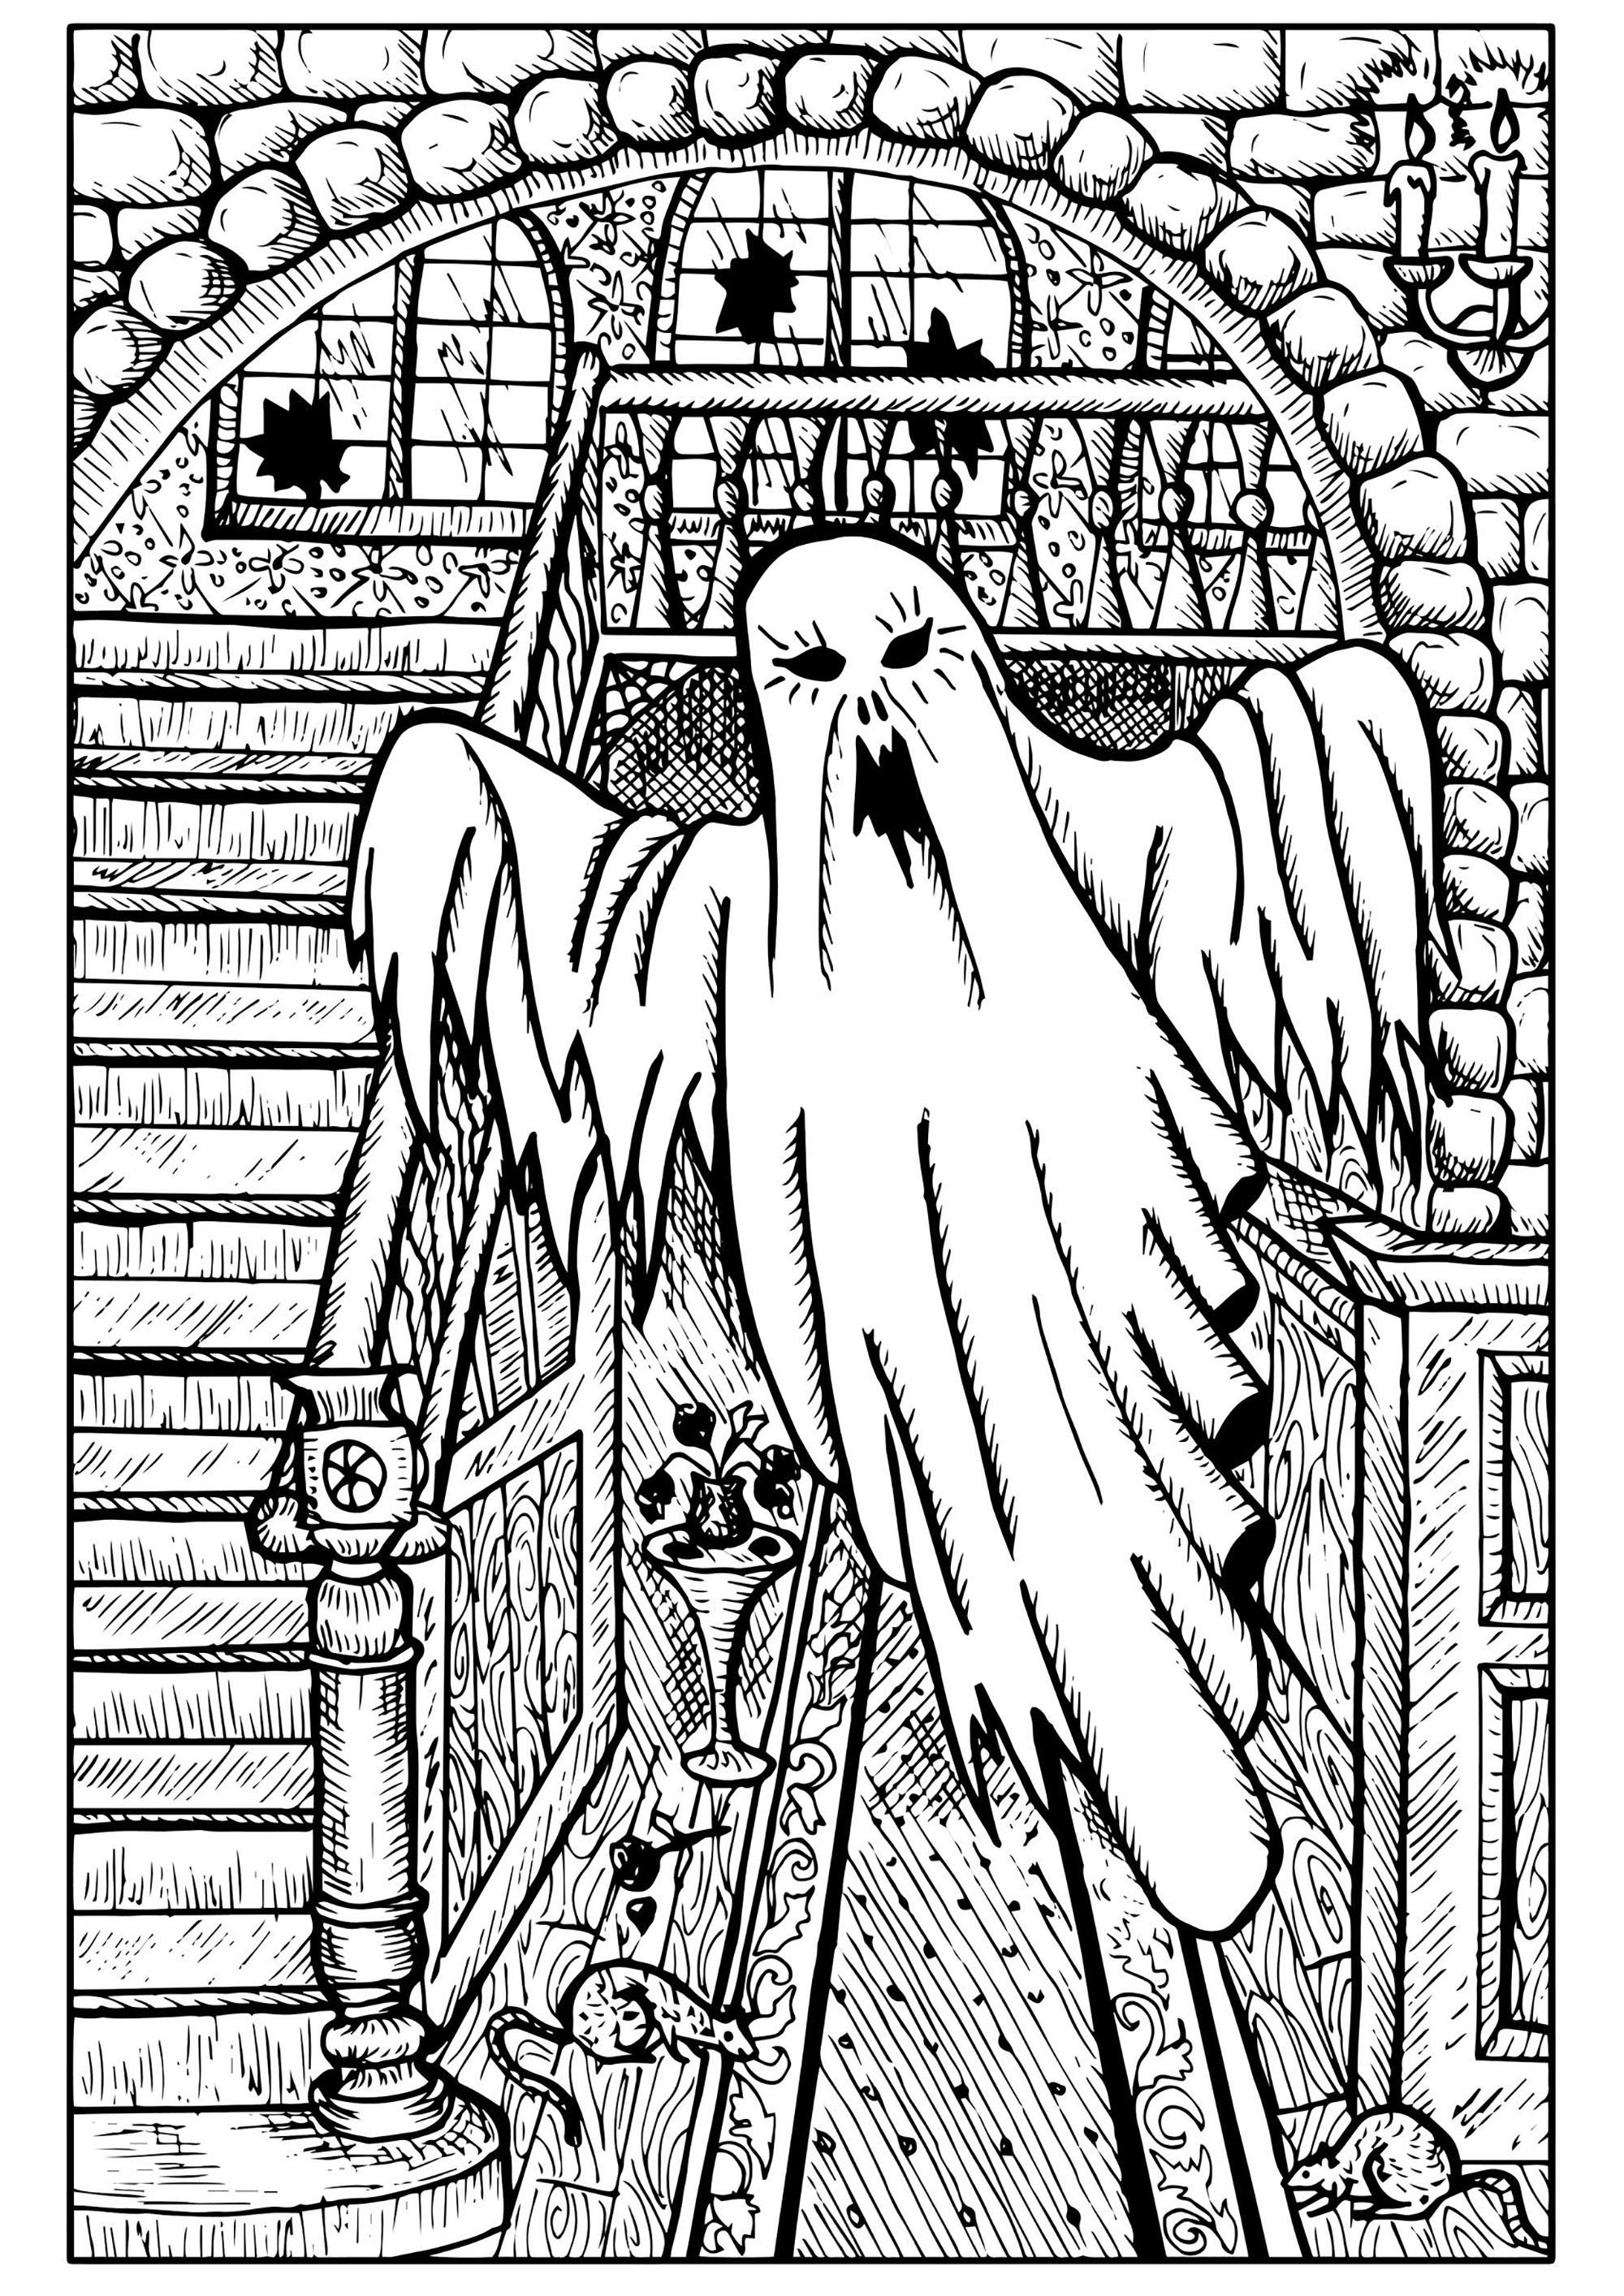 Fun Halloween coloring pages to print and color. A frightening ghost, in the house he has been haunting for a few hundred years...